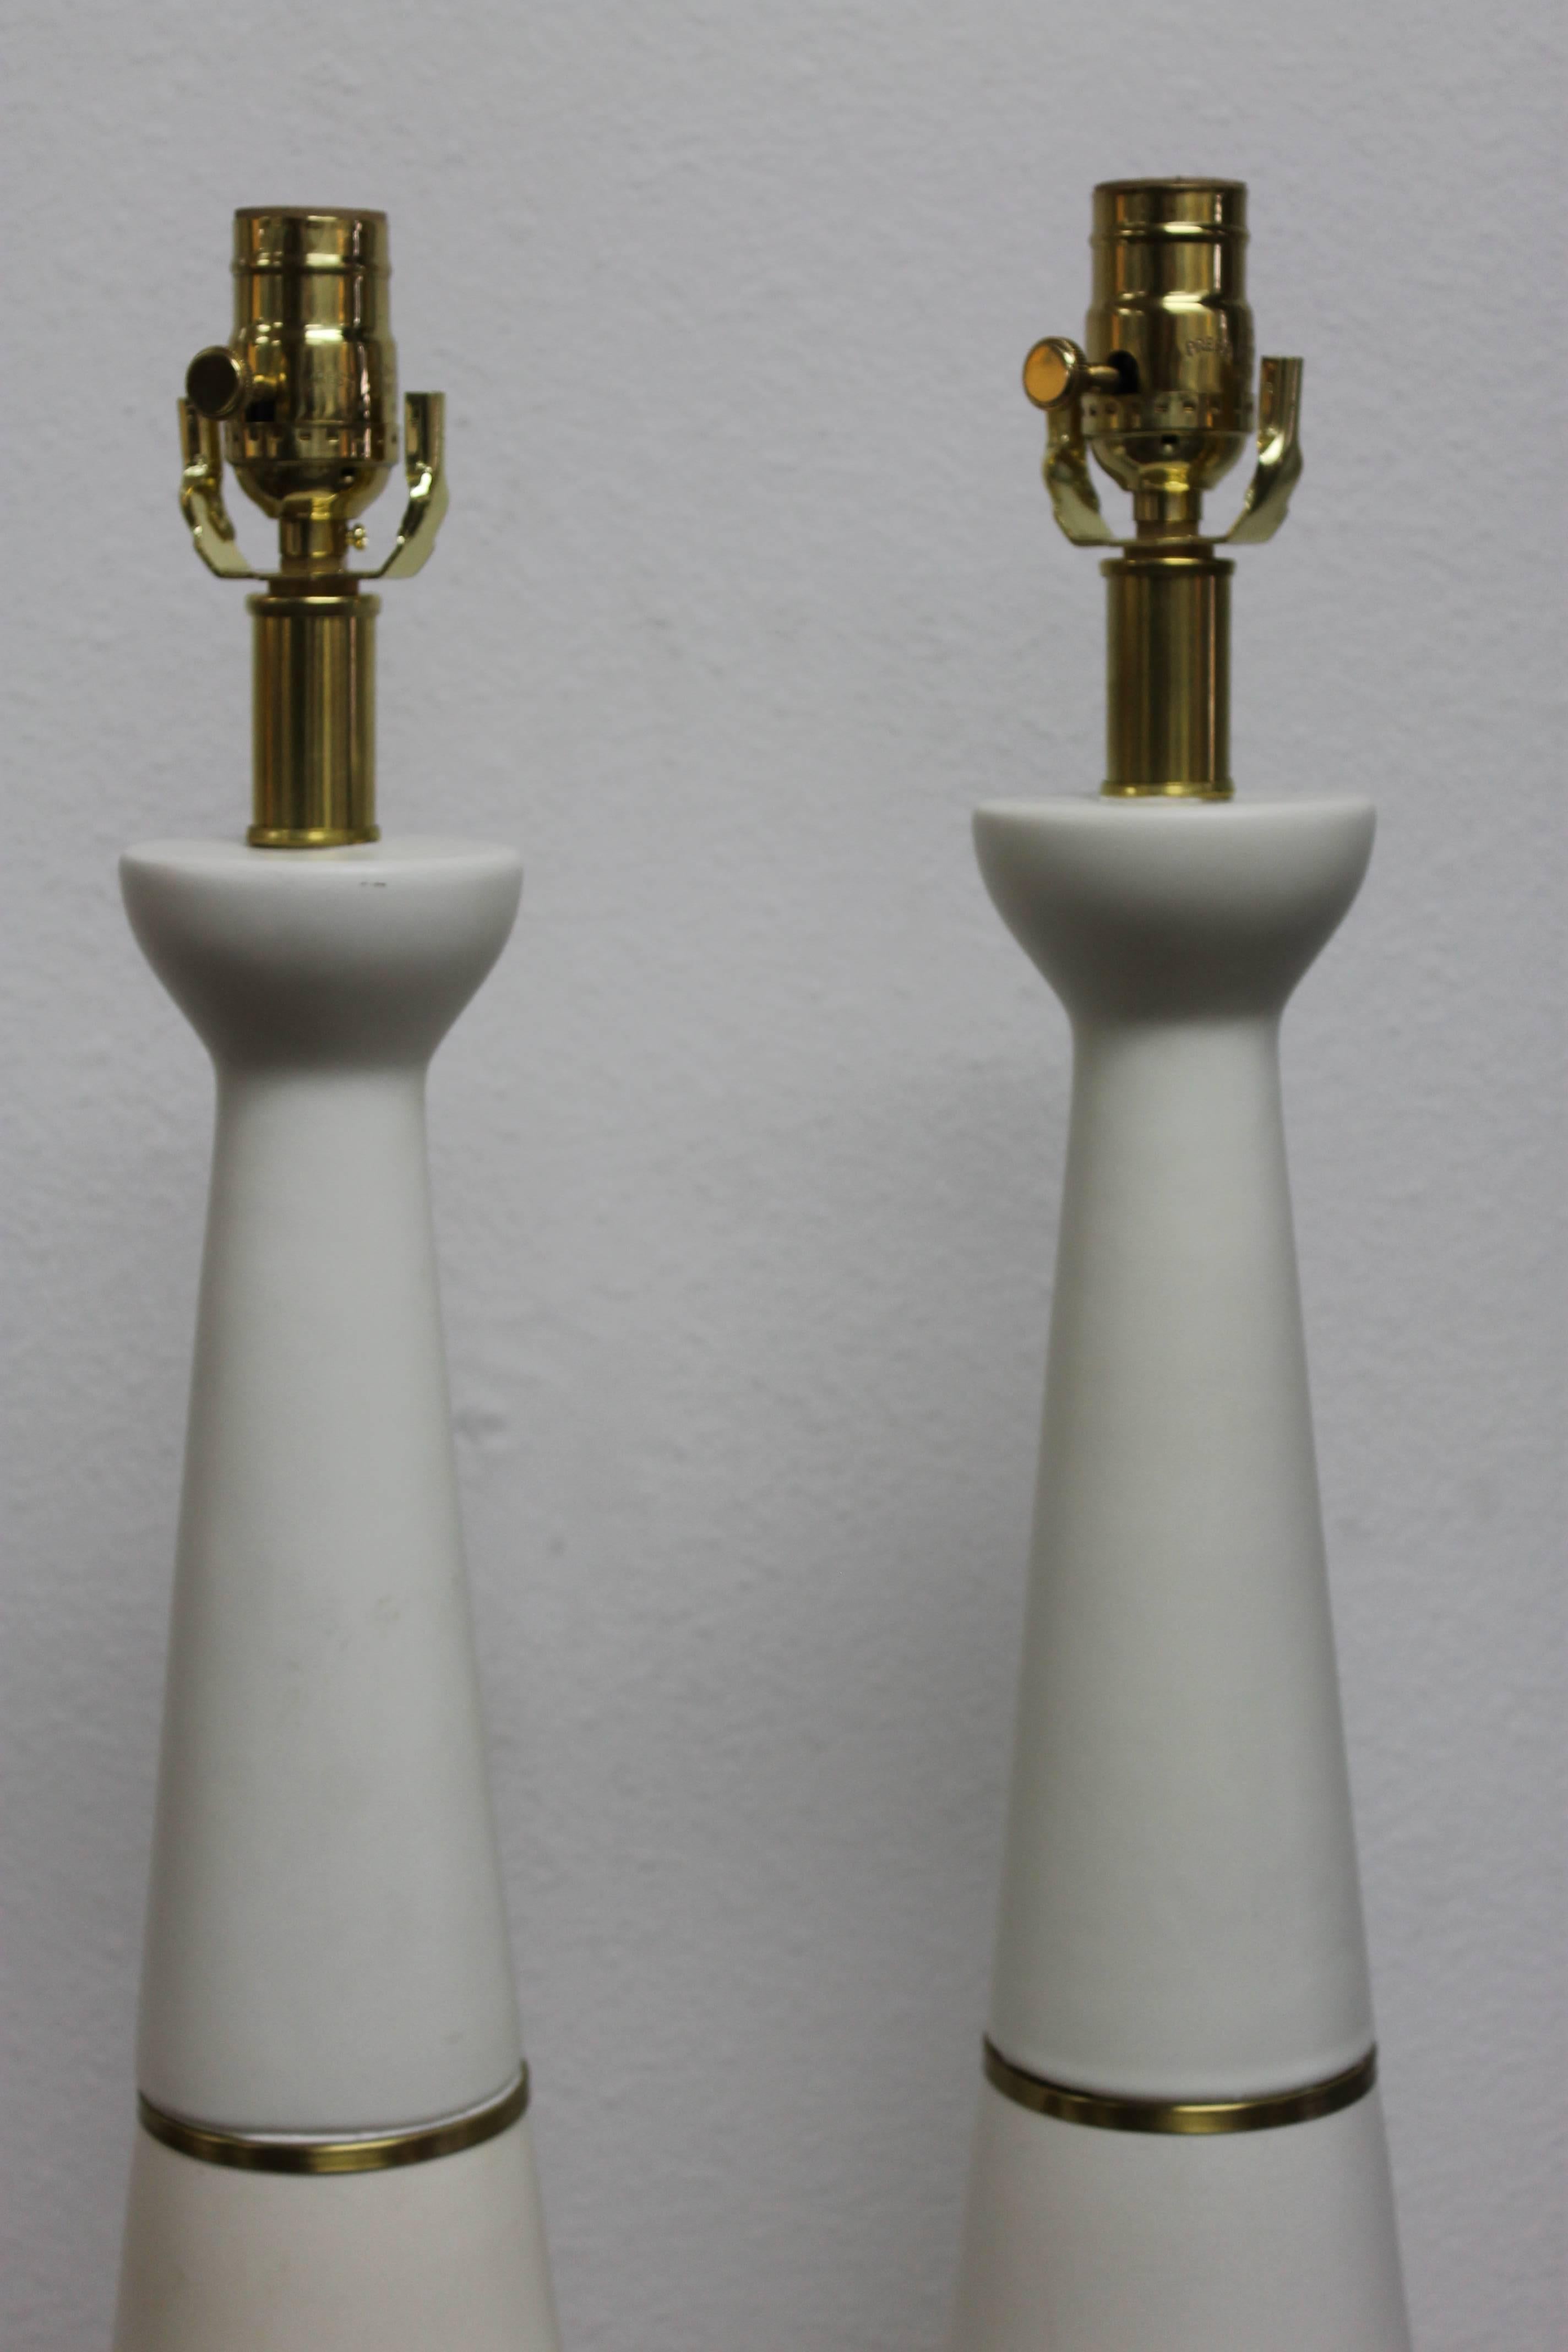 Pair of white ceramic lamps with brass rings. Measures: Wood base is 6.5" diameter. Ceramic portion is 25" high. Total height from base to the bottom of socket is 28".  Lamp shades not included.
  